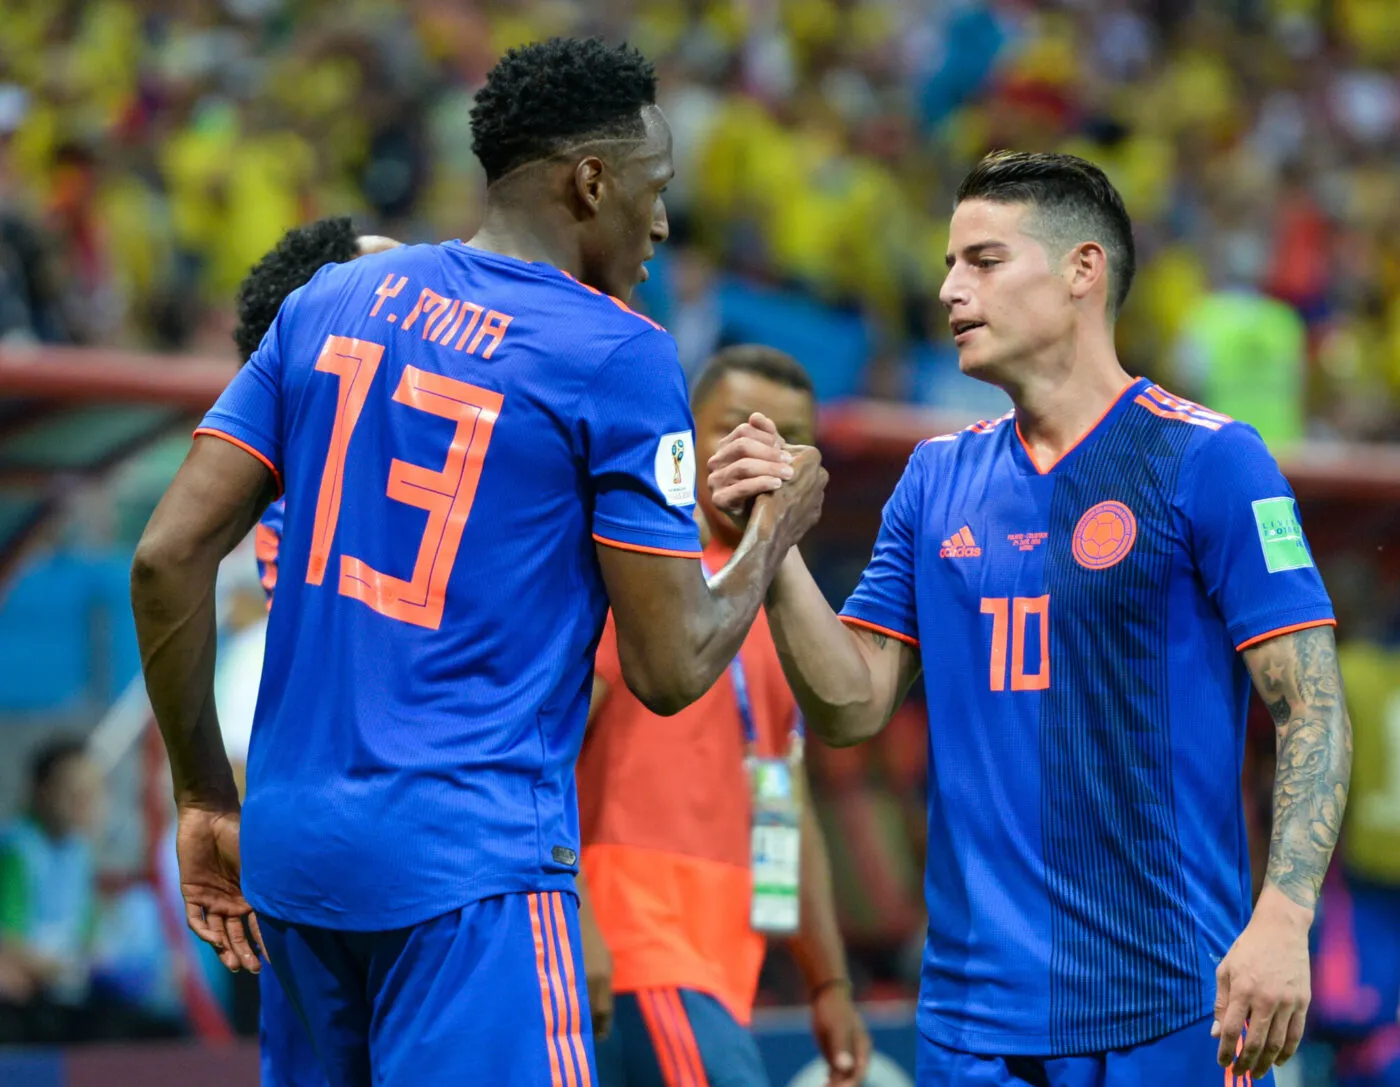 5555699 24.06.2018 Colombia's Yerry Mina, left shakes hands with James Rodriguez celebrating a goal during the World Cup Group H soccer match between Poland and Colombia at the Kazan Arena, in Kazan, Russia, June 24, 2018. Alexandr Kryazhev / Sputnik / Icon Sport